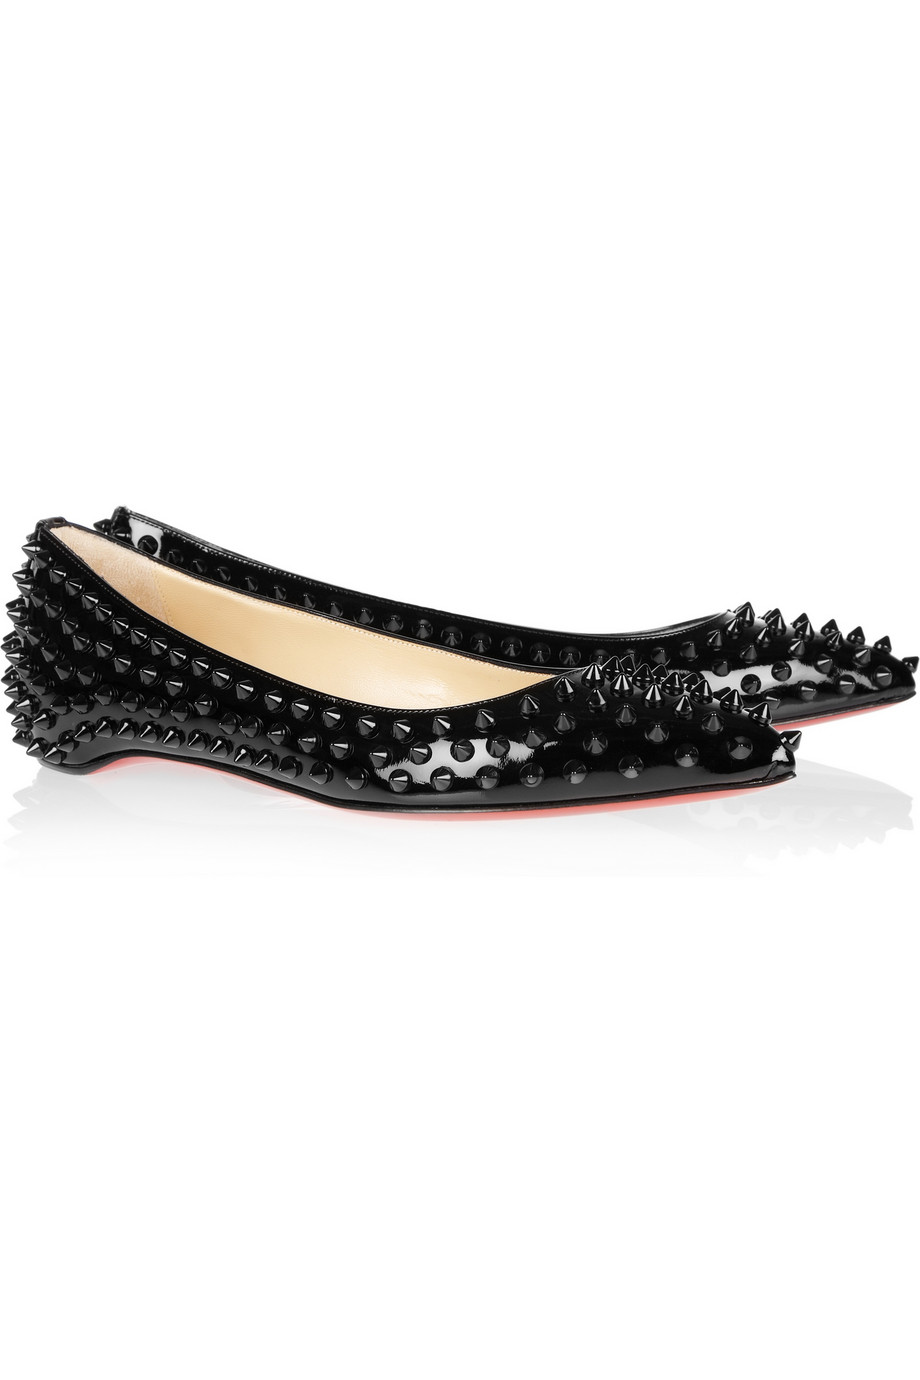 Christian Louboutin Pigalle Spikes Flat in Black -